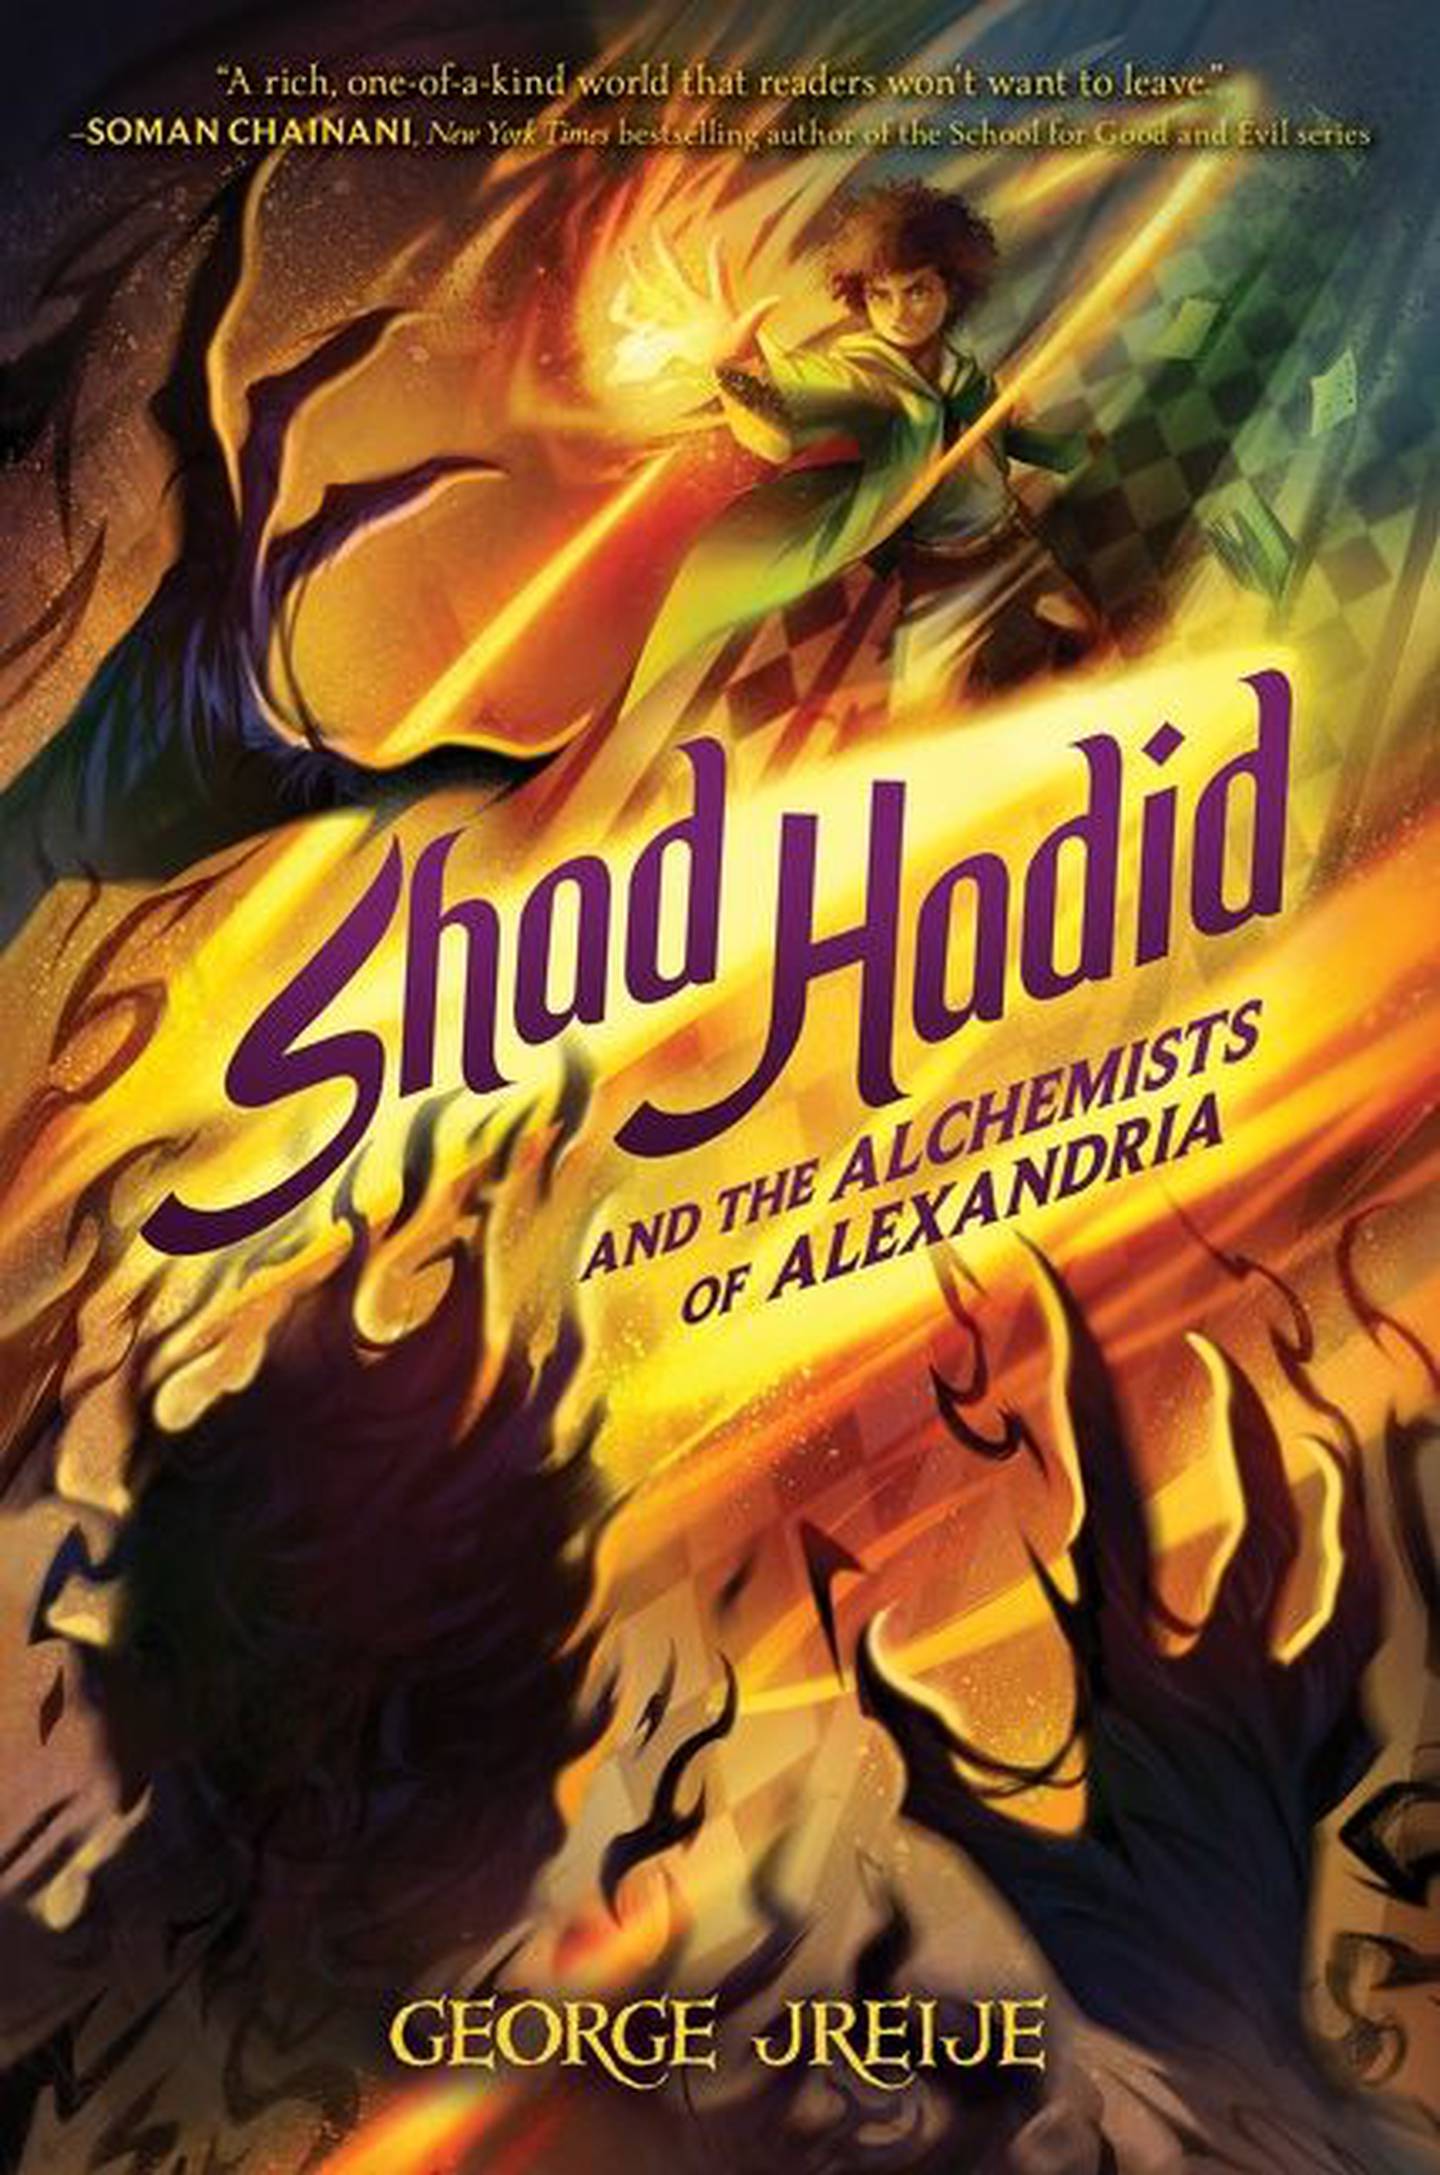 'Shad Hadid and the Alchemists of Alexandria' is Lebanese American George Jreije’s debut novel. Photo: Harper Collins